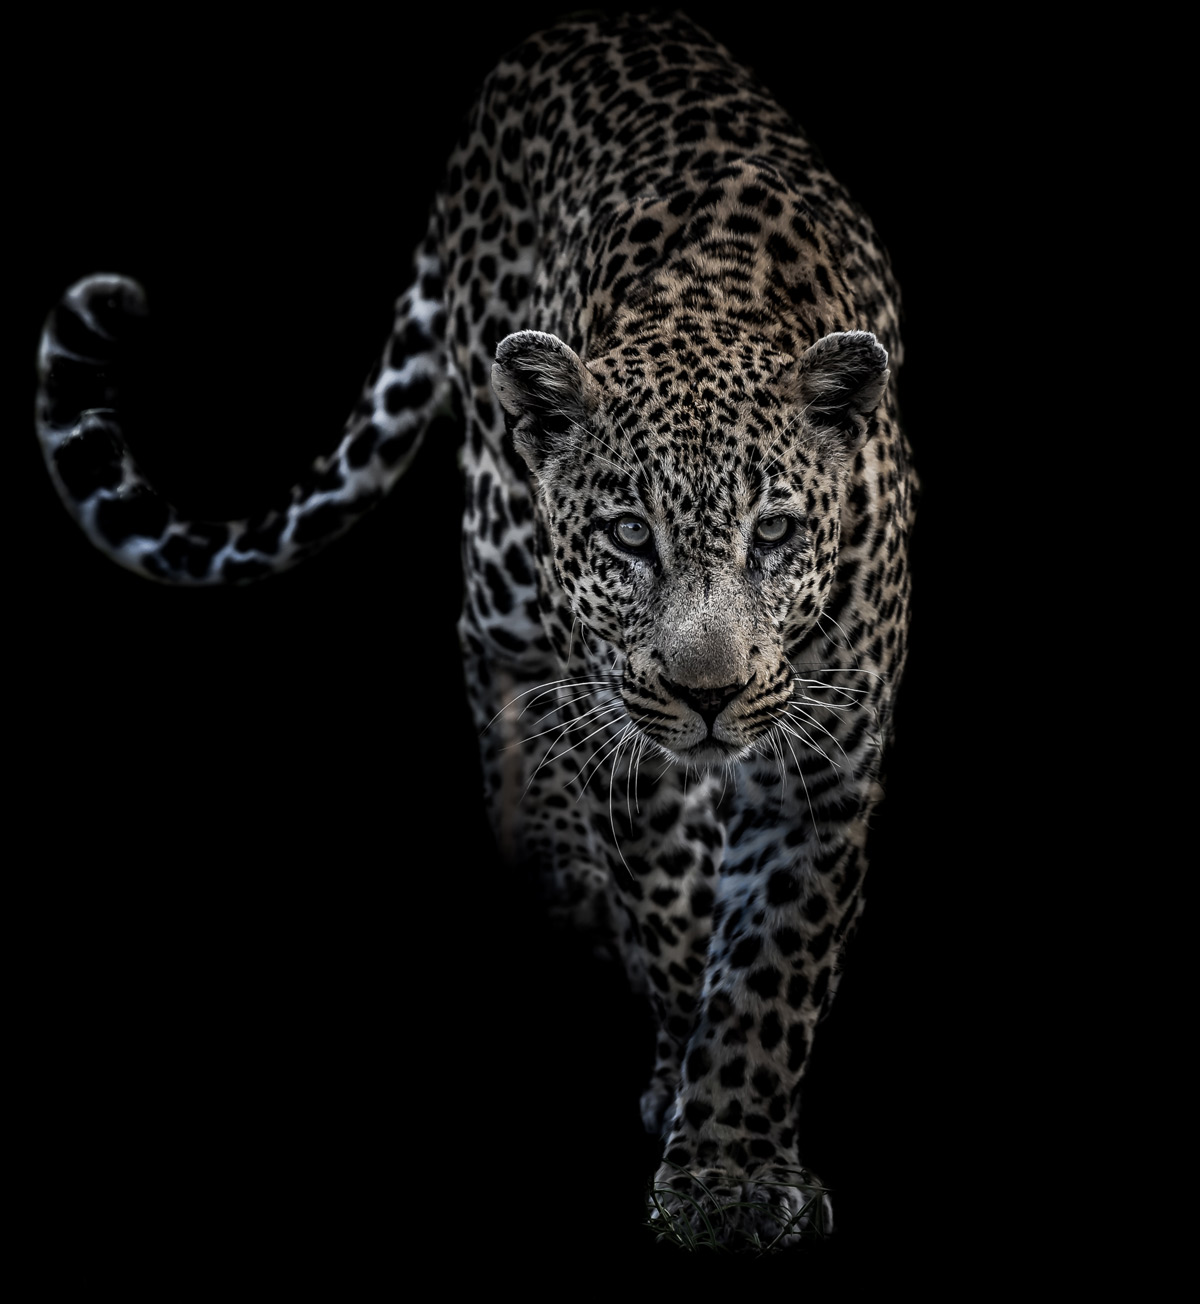 A dominant male leopard approaches in Sabi Sands Private Game Reserve, South Africa © Saul Rivkind